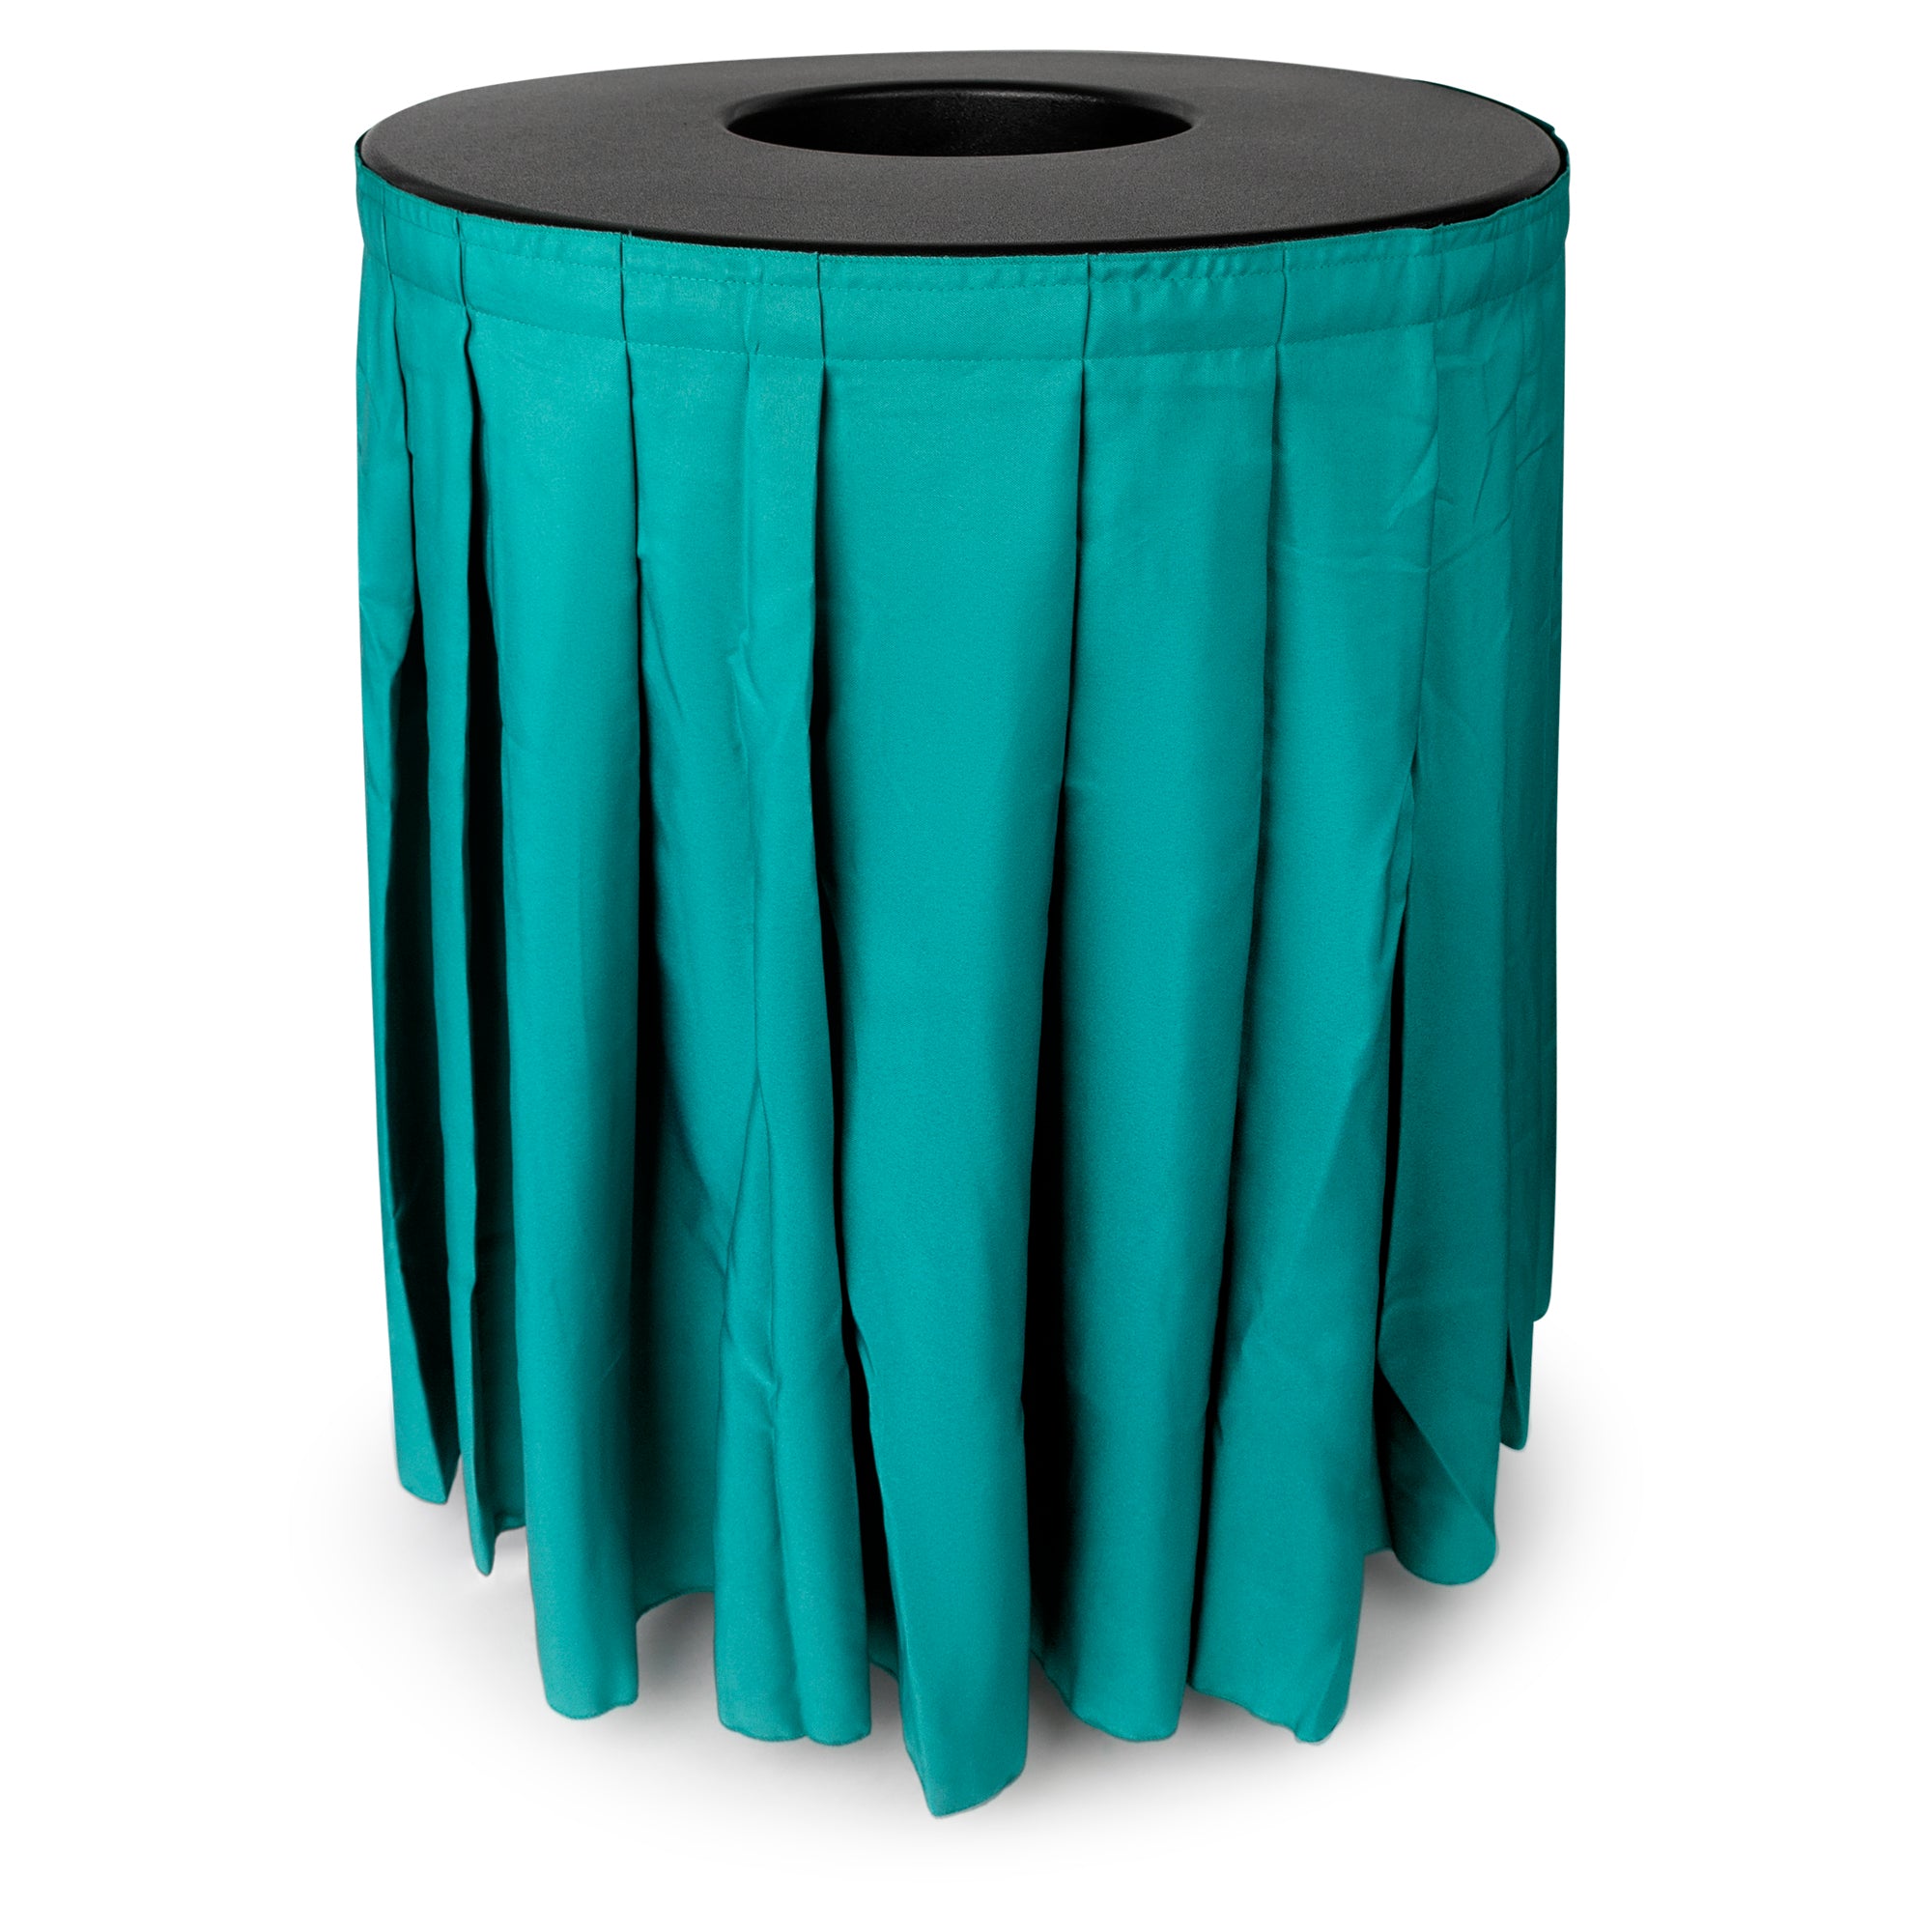 Round Black Garbage Can Cover - Solid Pleated Skirt Topper for 32-35 Gallon Indoor Garbage Cans Trash Bins, Waste Container Without Wheels - Ideal for Birthday Party, Events, Residential Use